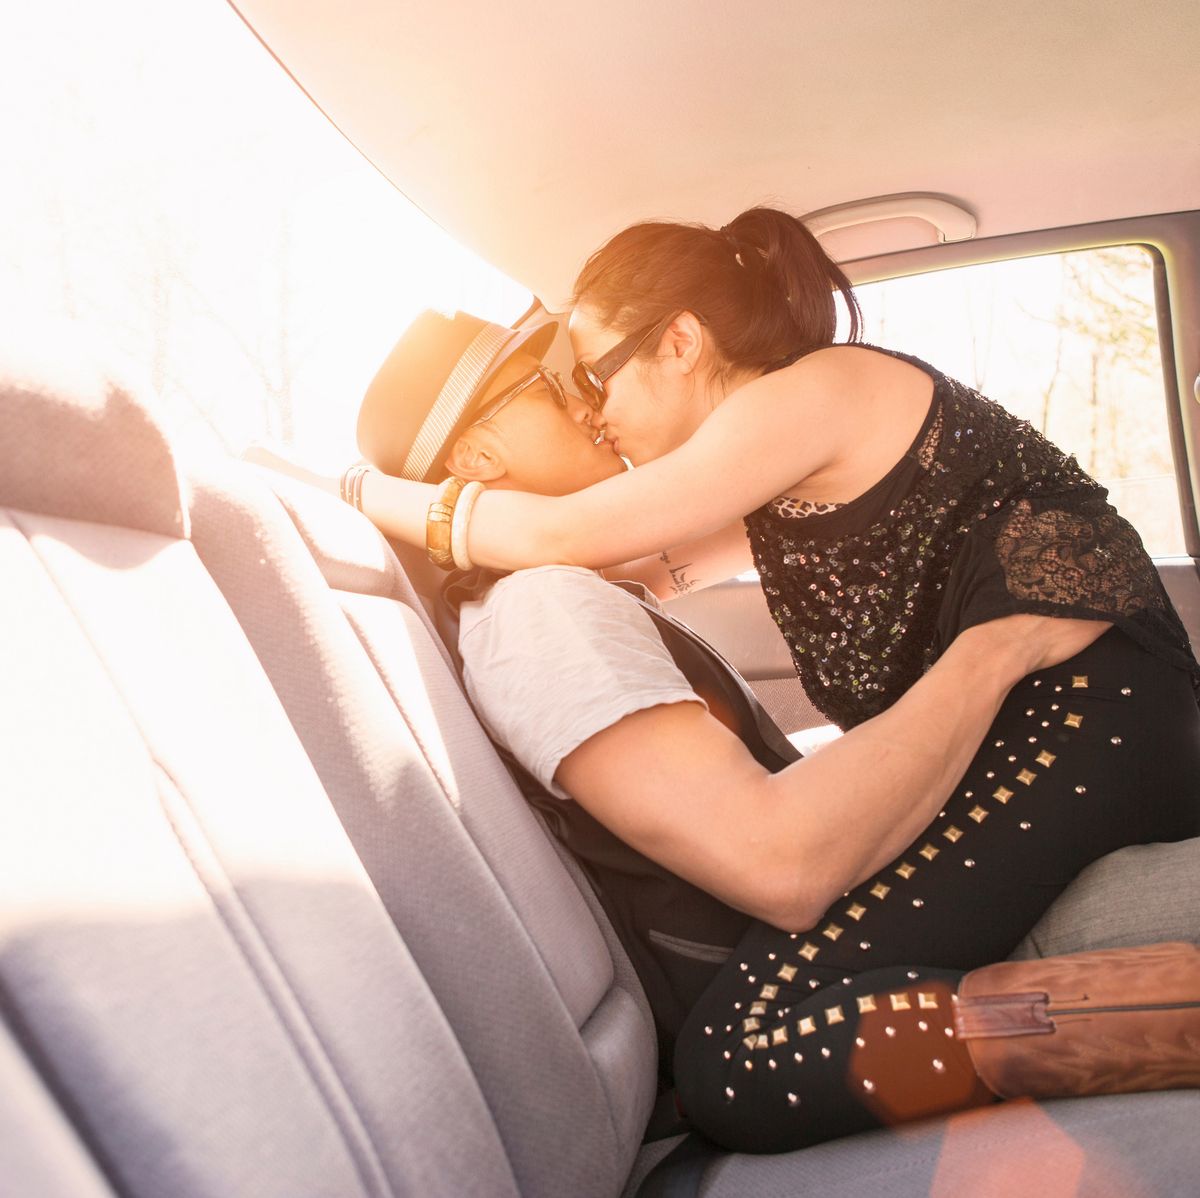 Sex Krte Huve Boy An Girl Opn Pic - The 10 Best Car Sex Positions - How to Have Sex in a Car